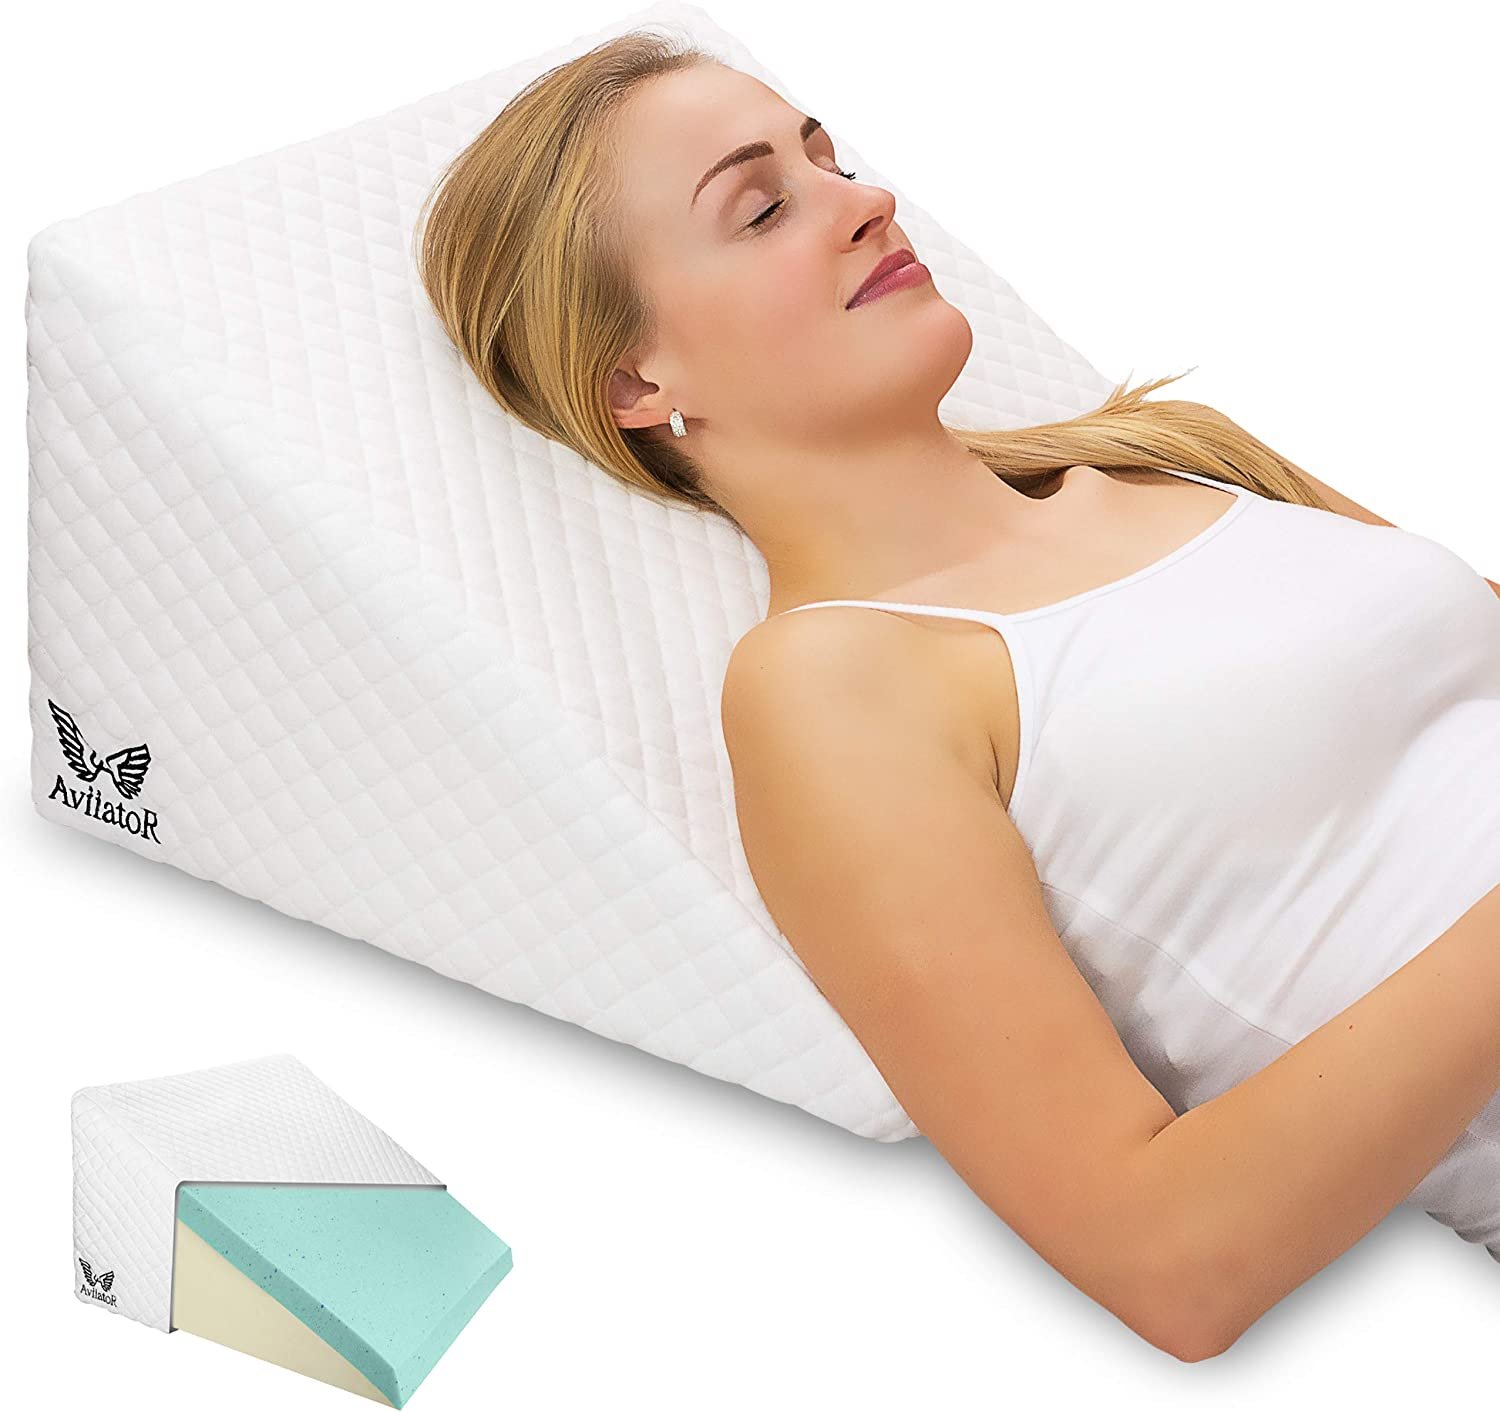 Acid Reflux Flex Foam Support Bed Wedge Pillow Removable Zip Cover UK Made High Density Foam All Sizes Wedge 20x18x11 